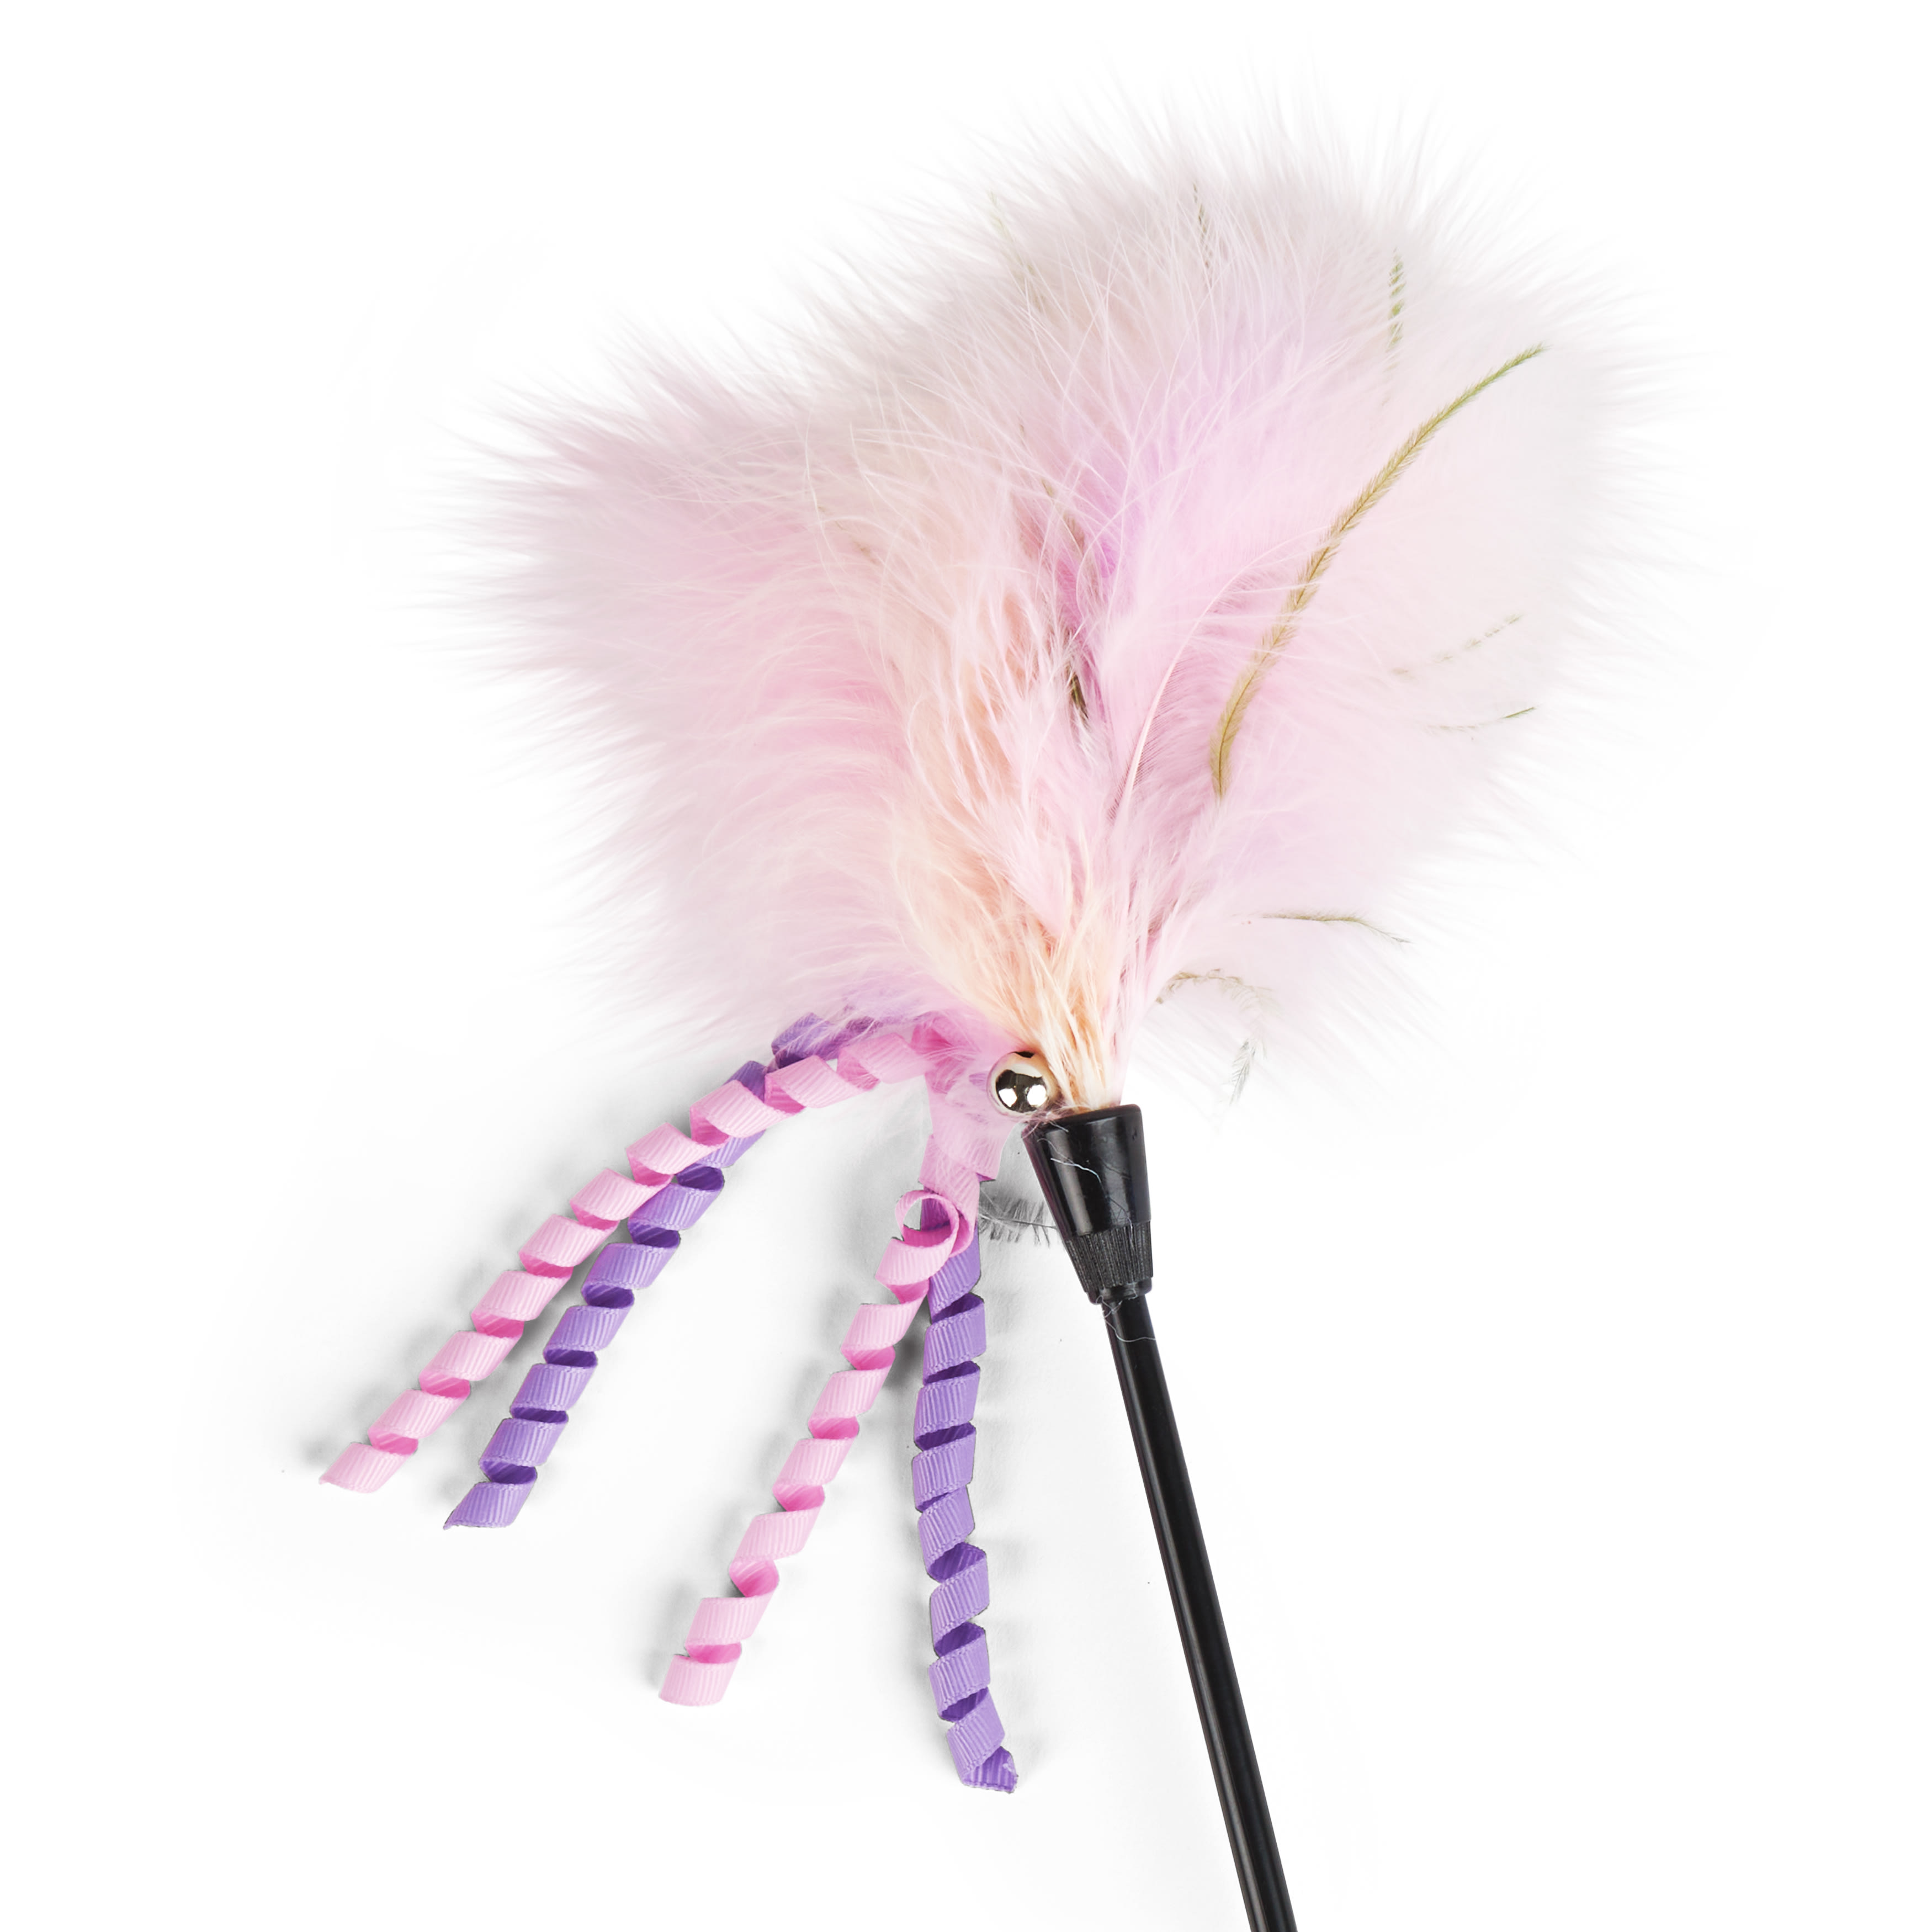  Kats'N Us Cat Toy Wand Refill - Pink Mouse with Real Fur Tail  Cat Teaser Wand Attachment : Pet Supplies